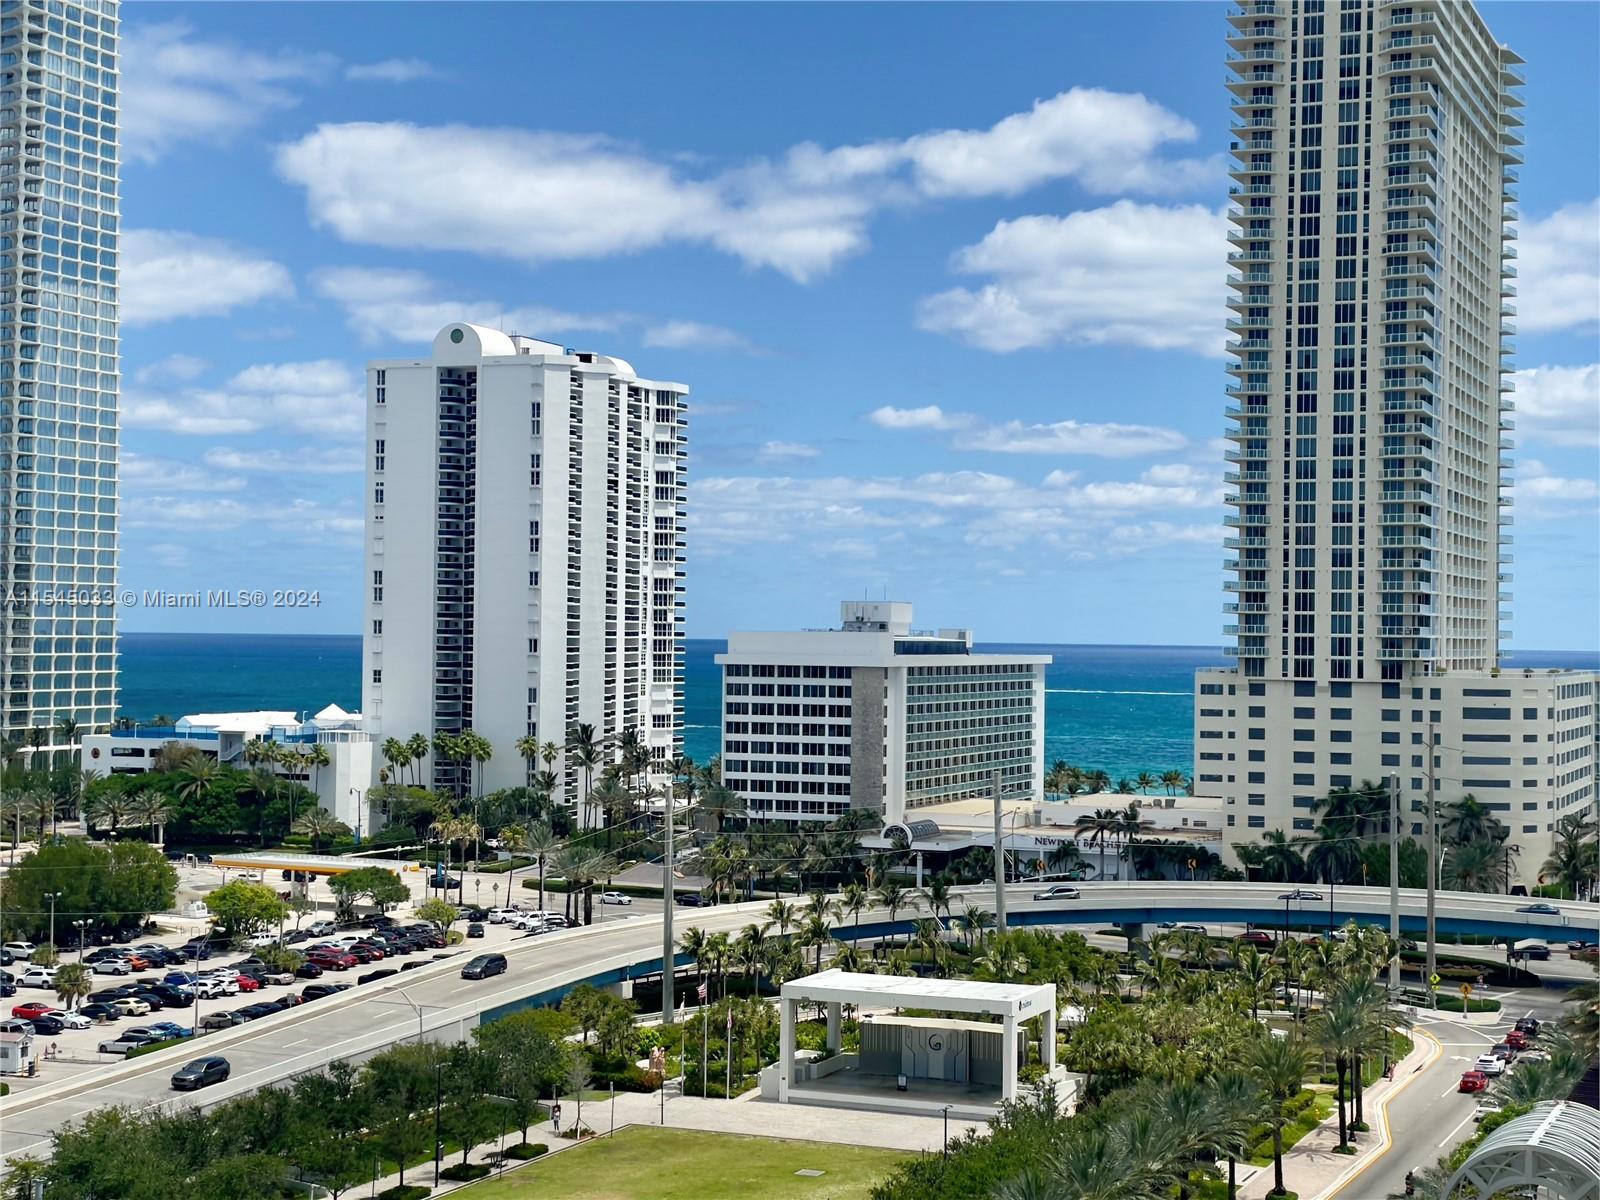 MOTIVATED OWNER! Panoramic views of Sunny Isles Beach and the Atlantic Ocean from the oversized wrap-around balcony of this stunning 3-bedroom ALL SUITES 3.5-bathroom CORNER UNIT. Spanning 1,892 square feet (176 m2), the modern open layout and large kitchen island create an inviting space perfect for entertaining.

Upgrades includes 24x24 Italian tiles throughout, Bosch appliances and Sub-Zero refrigerator, custom Italian cabinetry, a spa-like master bathroom with an oversized soaking tub, and a dedicated laundry room.

Unwind with resort-style amenities, including an infinity pool, jacuzzi, fitness center, cinema and game rooms, kids playroom, and more. 24/7 front desk, security, and valet parking. Full beach service included. 

Easy to show & easy to love. Schedule a viewing today!